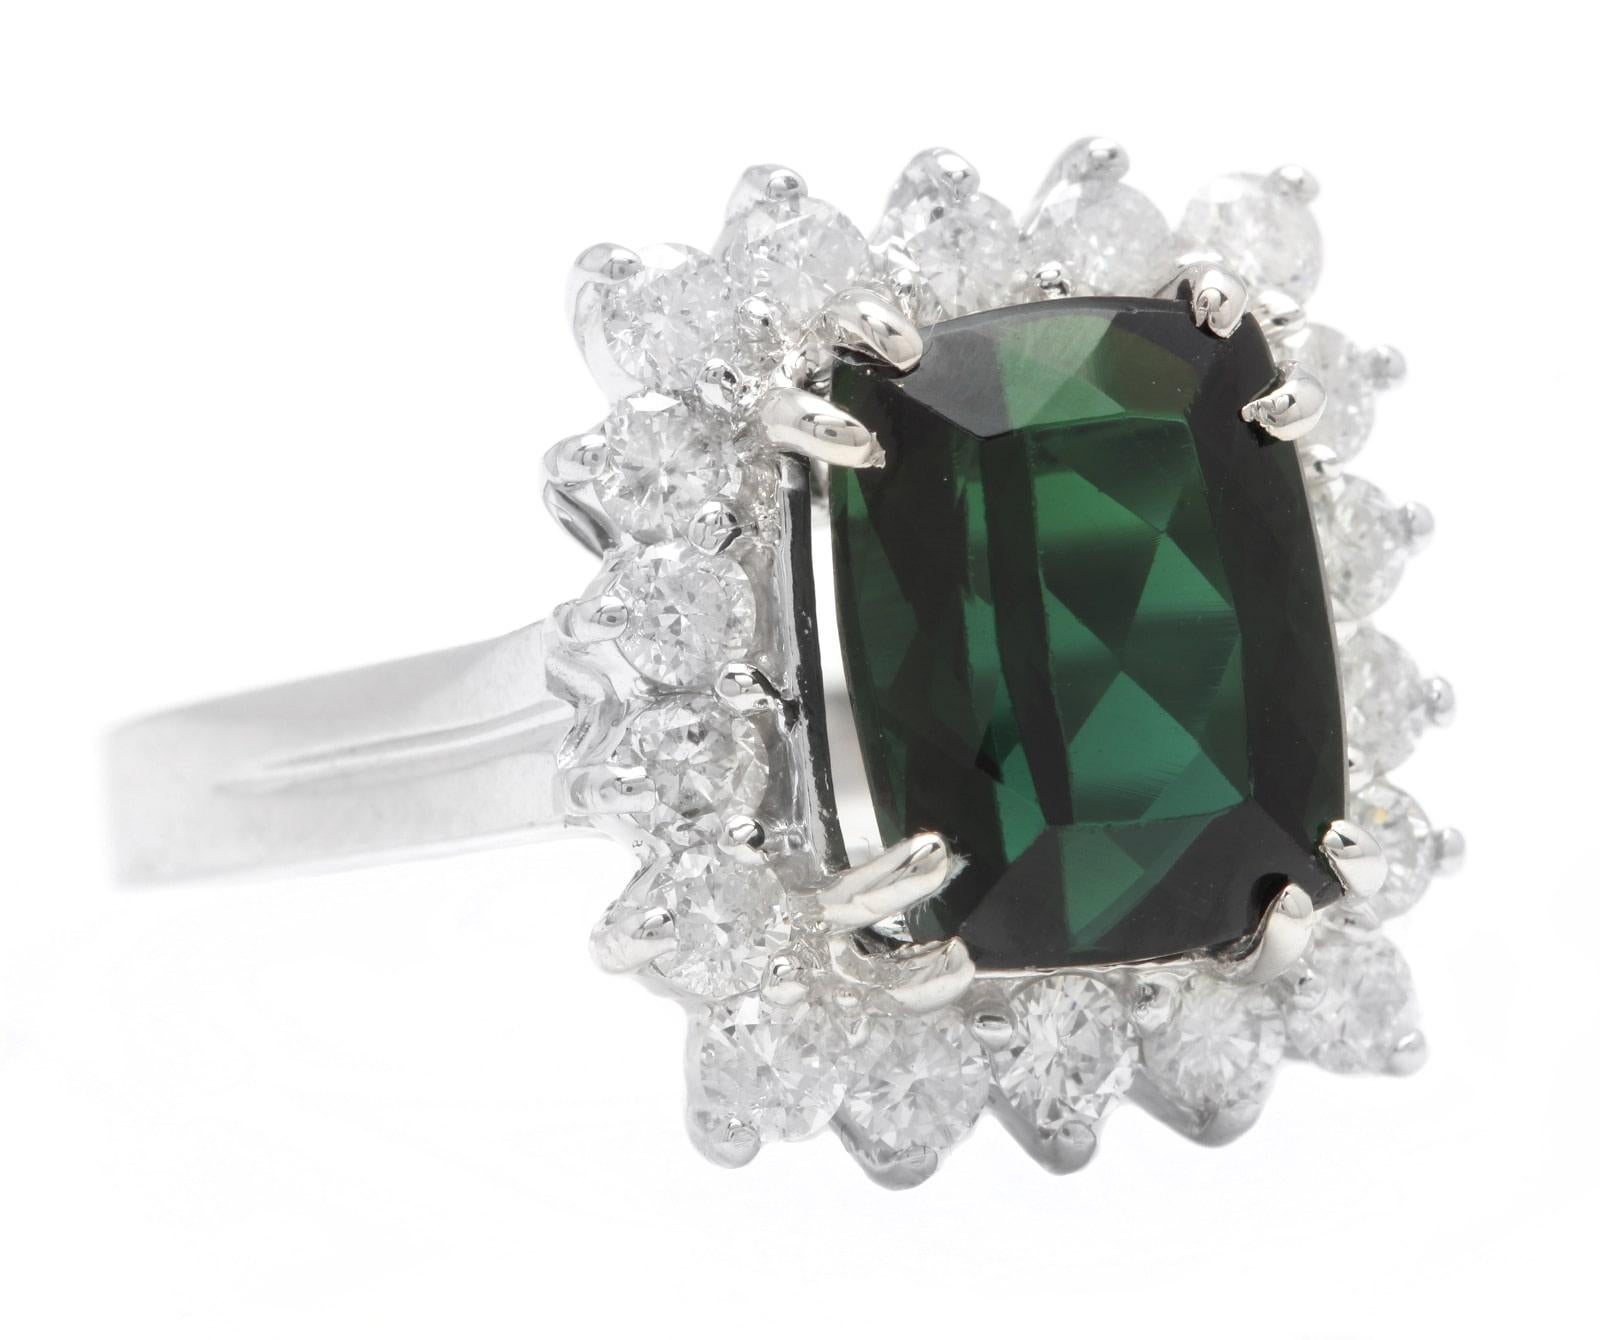 5.70 Carats Natural Very Nice Looking Green Tourmaline and Diamond 14K Solid White Gold Ring

Suggested Replacement Value:  $6,500.00

Total Natural Emerald Cut Tourmaline Weight is: Approx. 4.50 Carats

Tourmaline Measures: Approx. 11.00 x